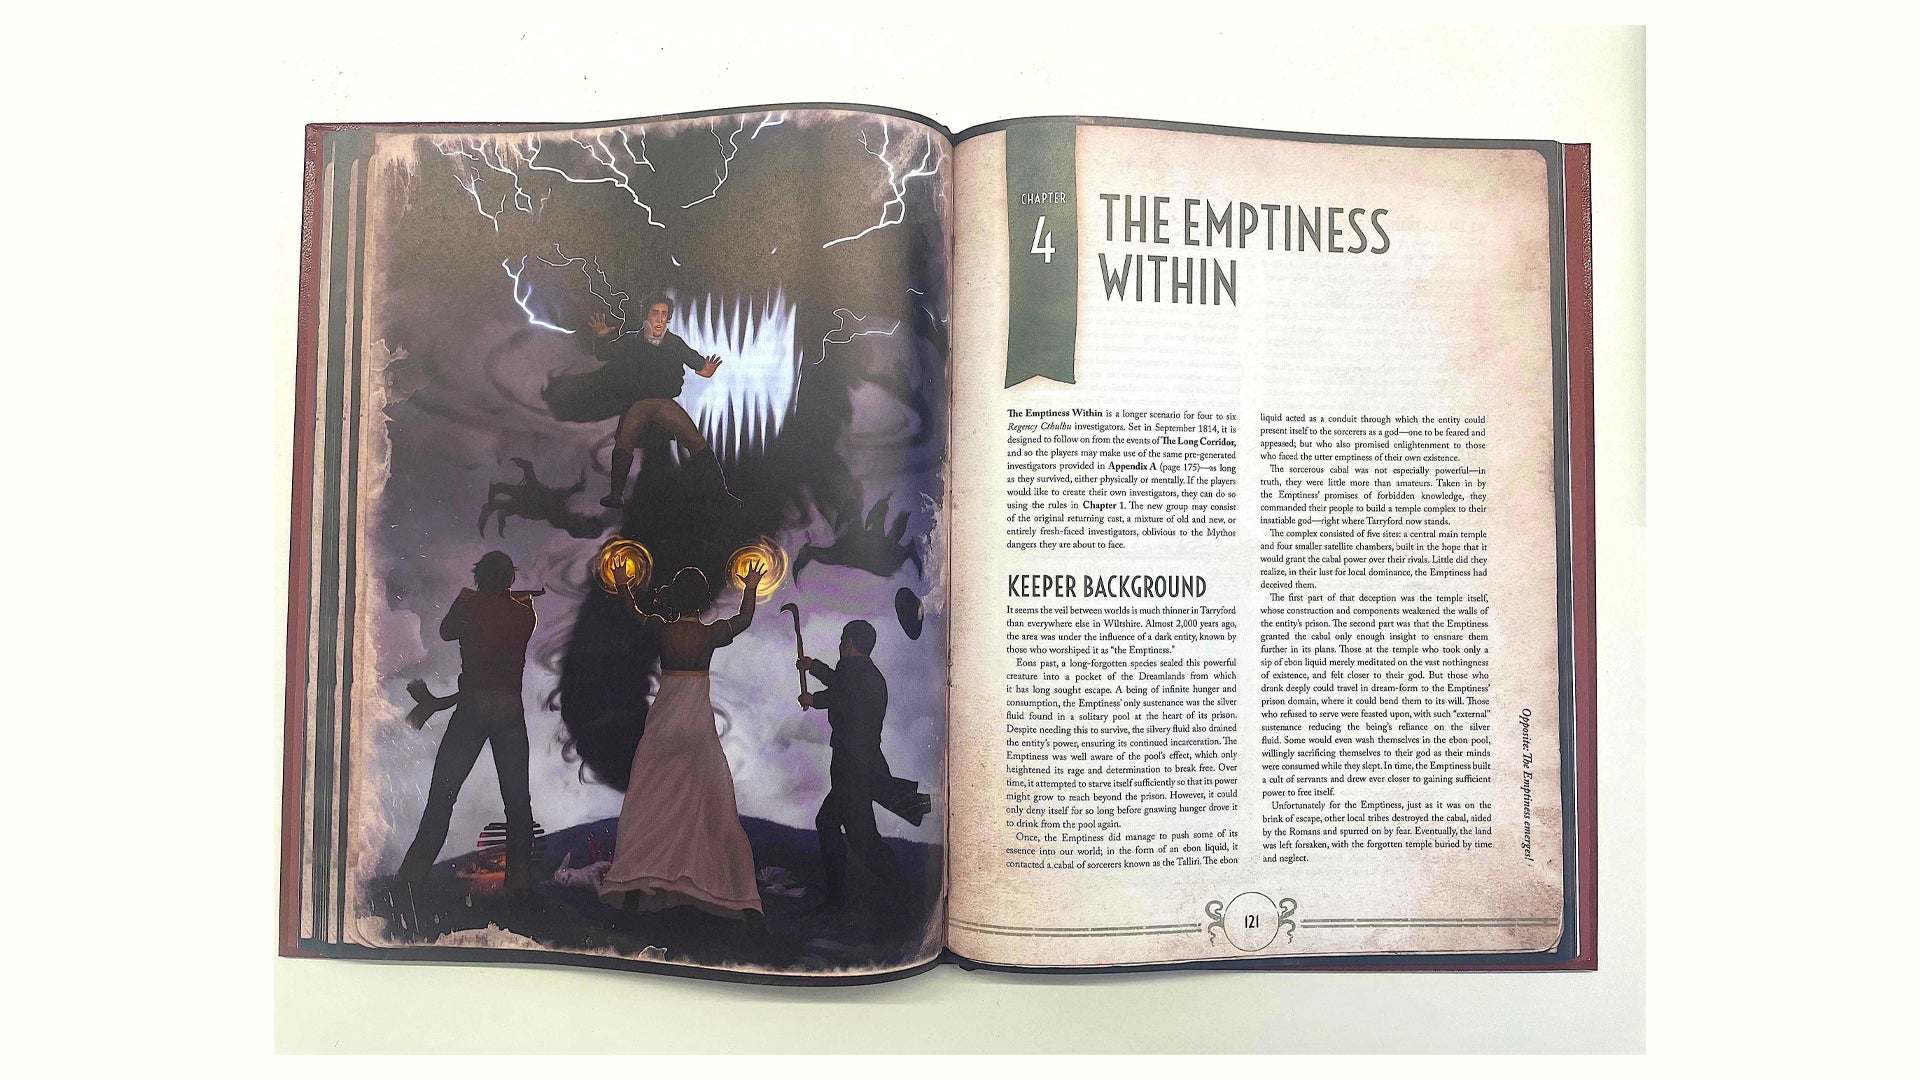 A image of a spread for the Regency Cthulhu sourcebook for Call of Cthulhu